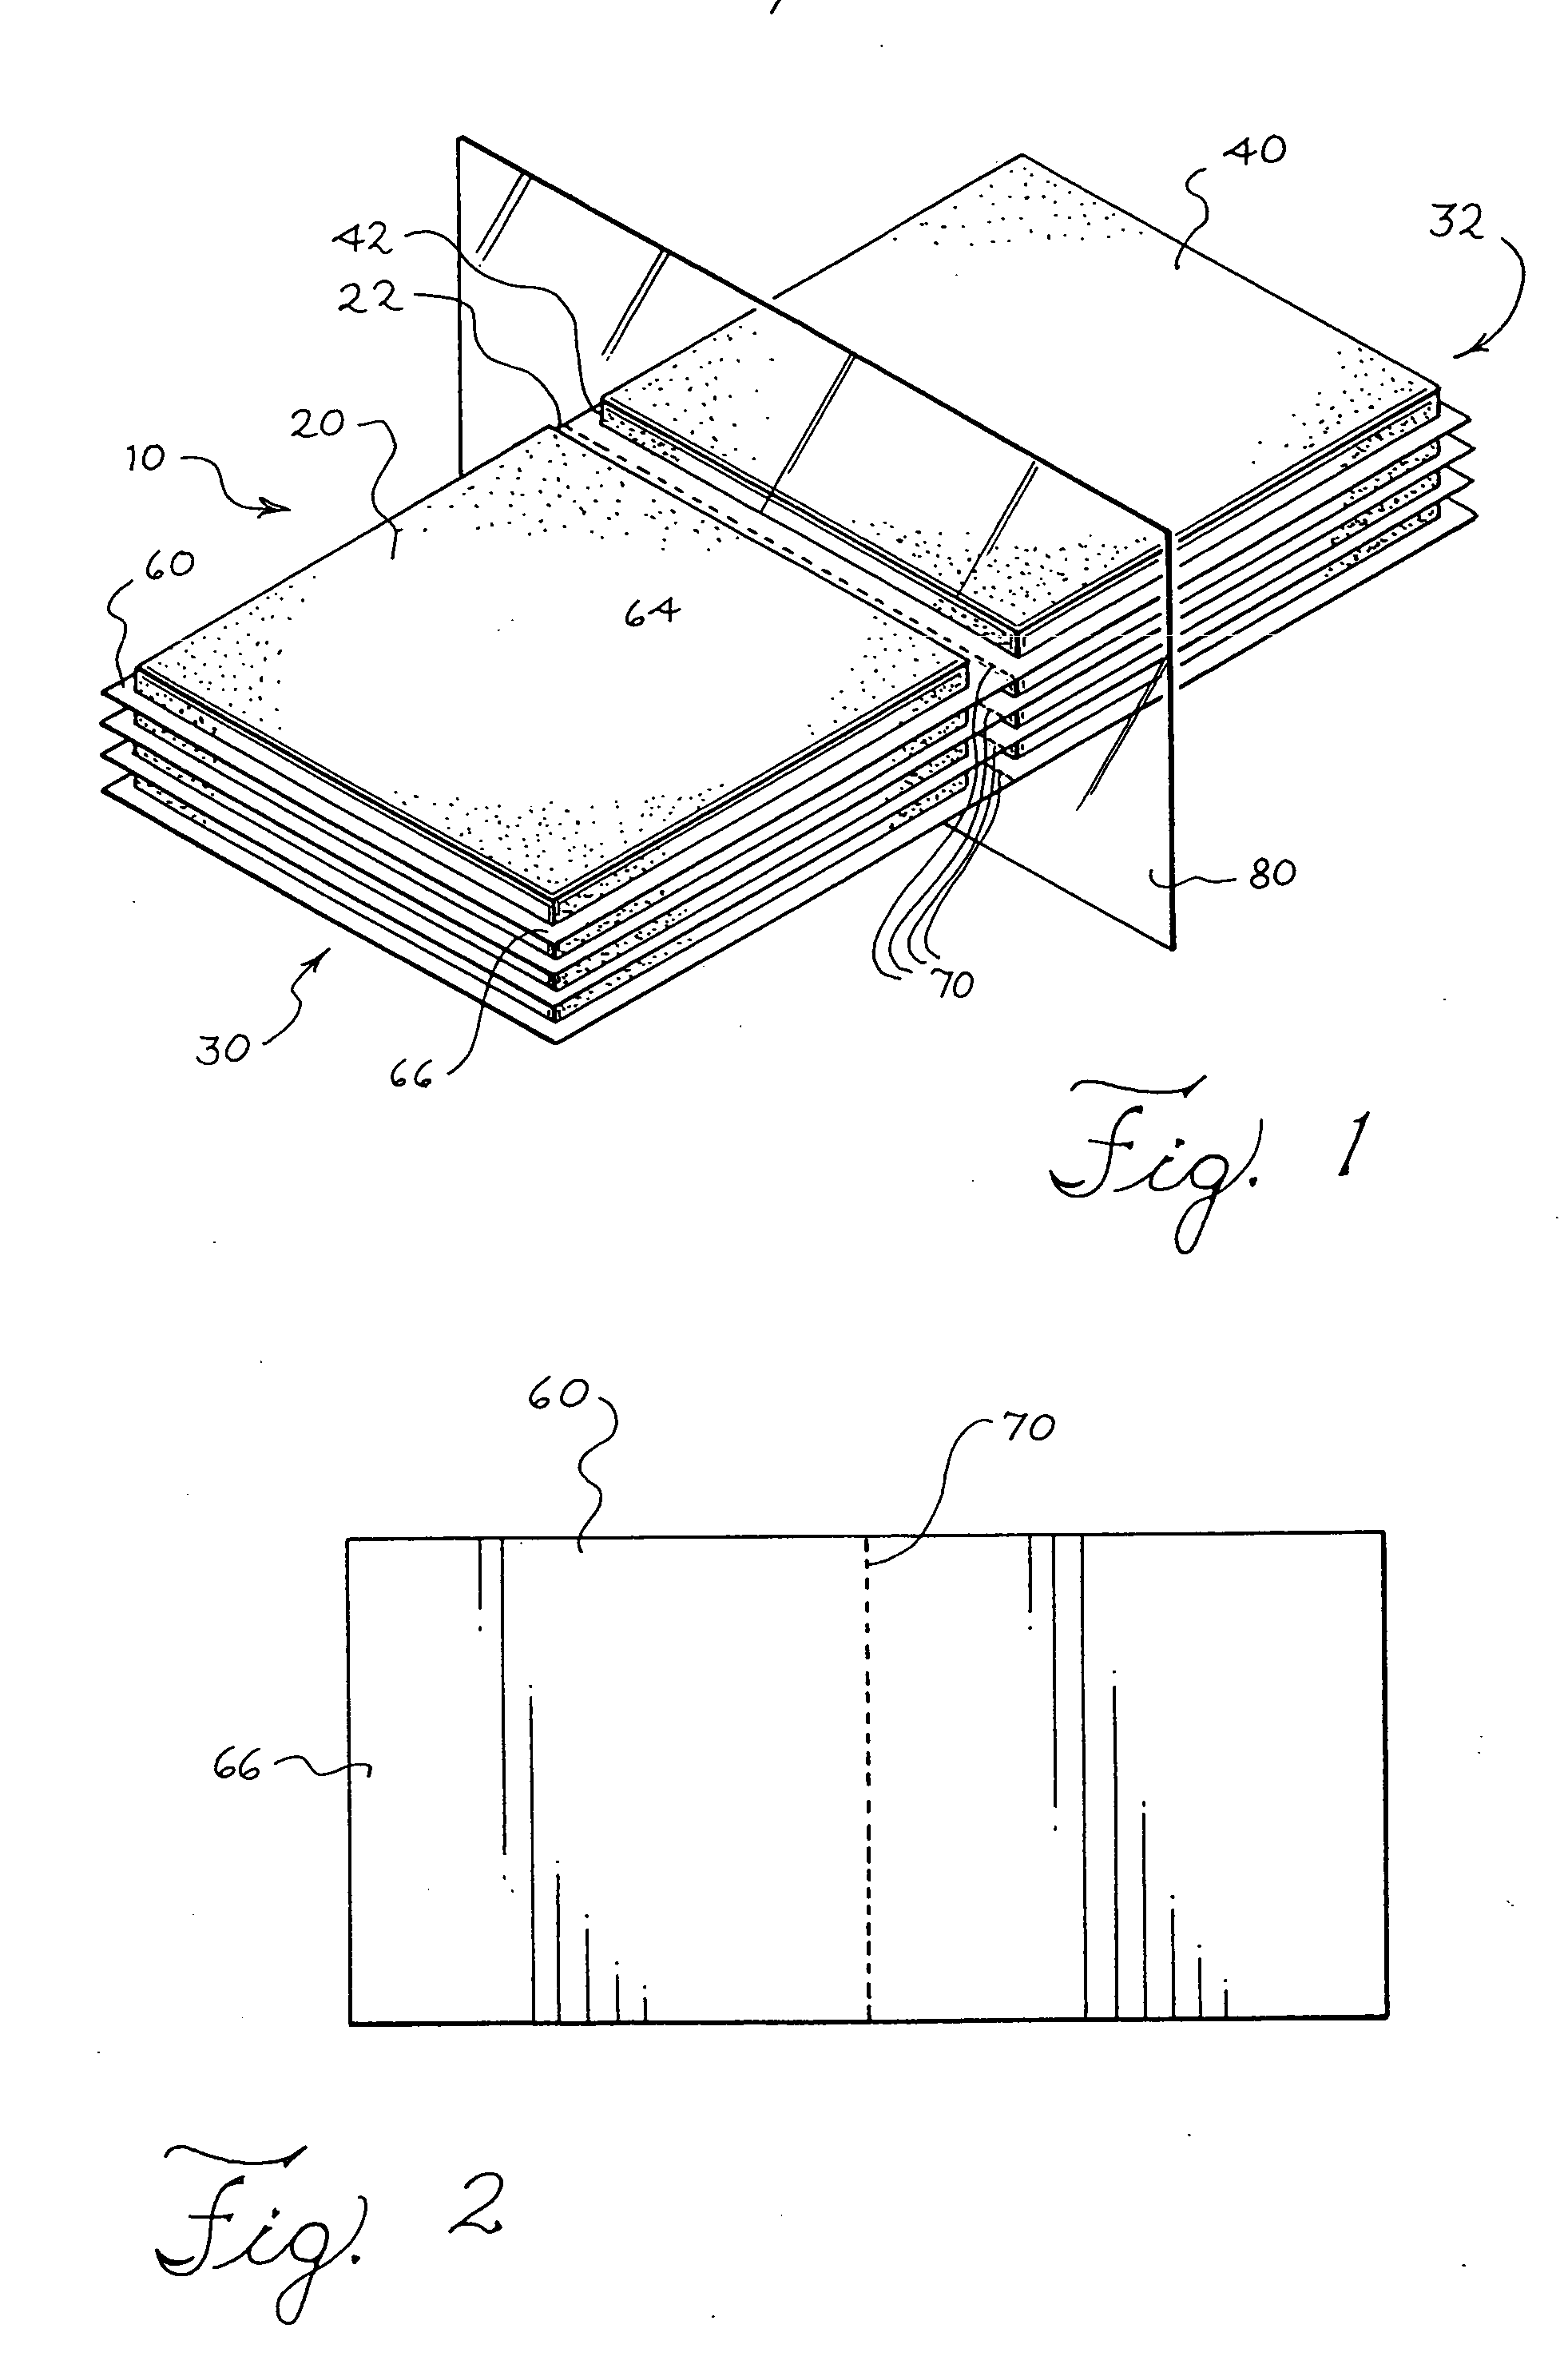 Apparatus and method for separating stacks of food products slices